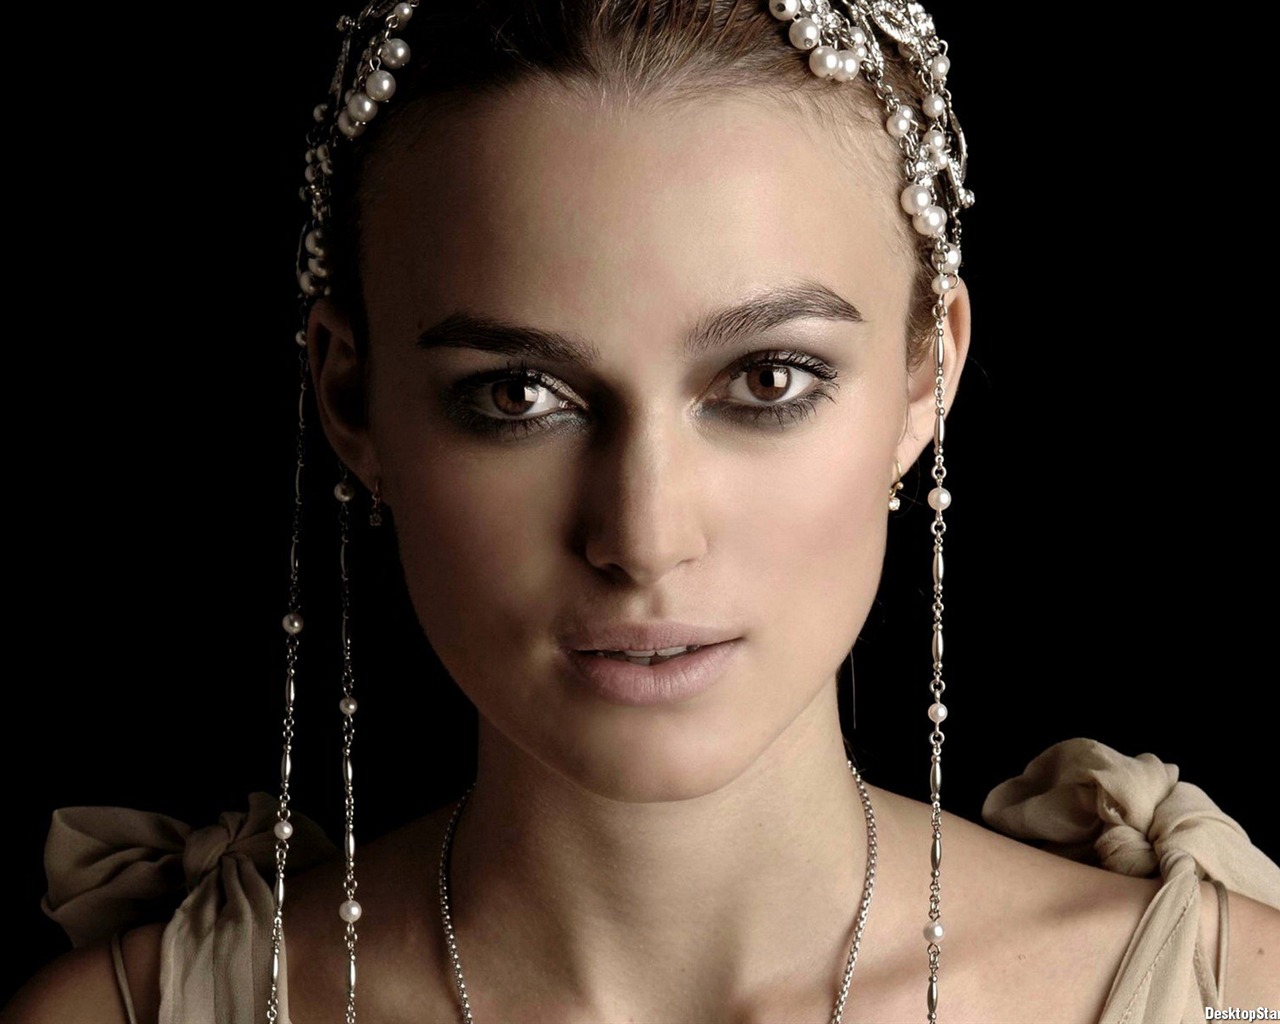 Keira Knightley #027 - 1280x1024 Wallpapers Pictures Photos Images